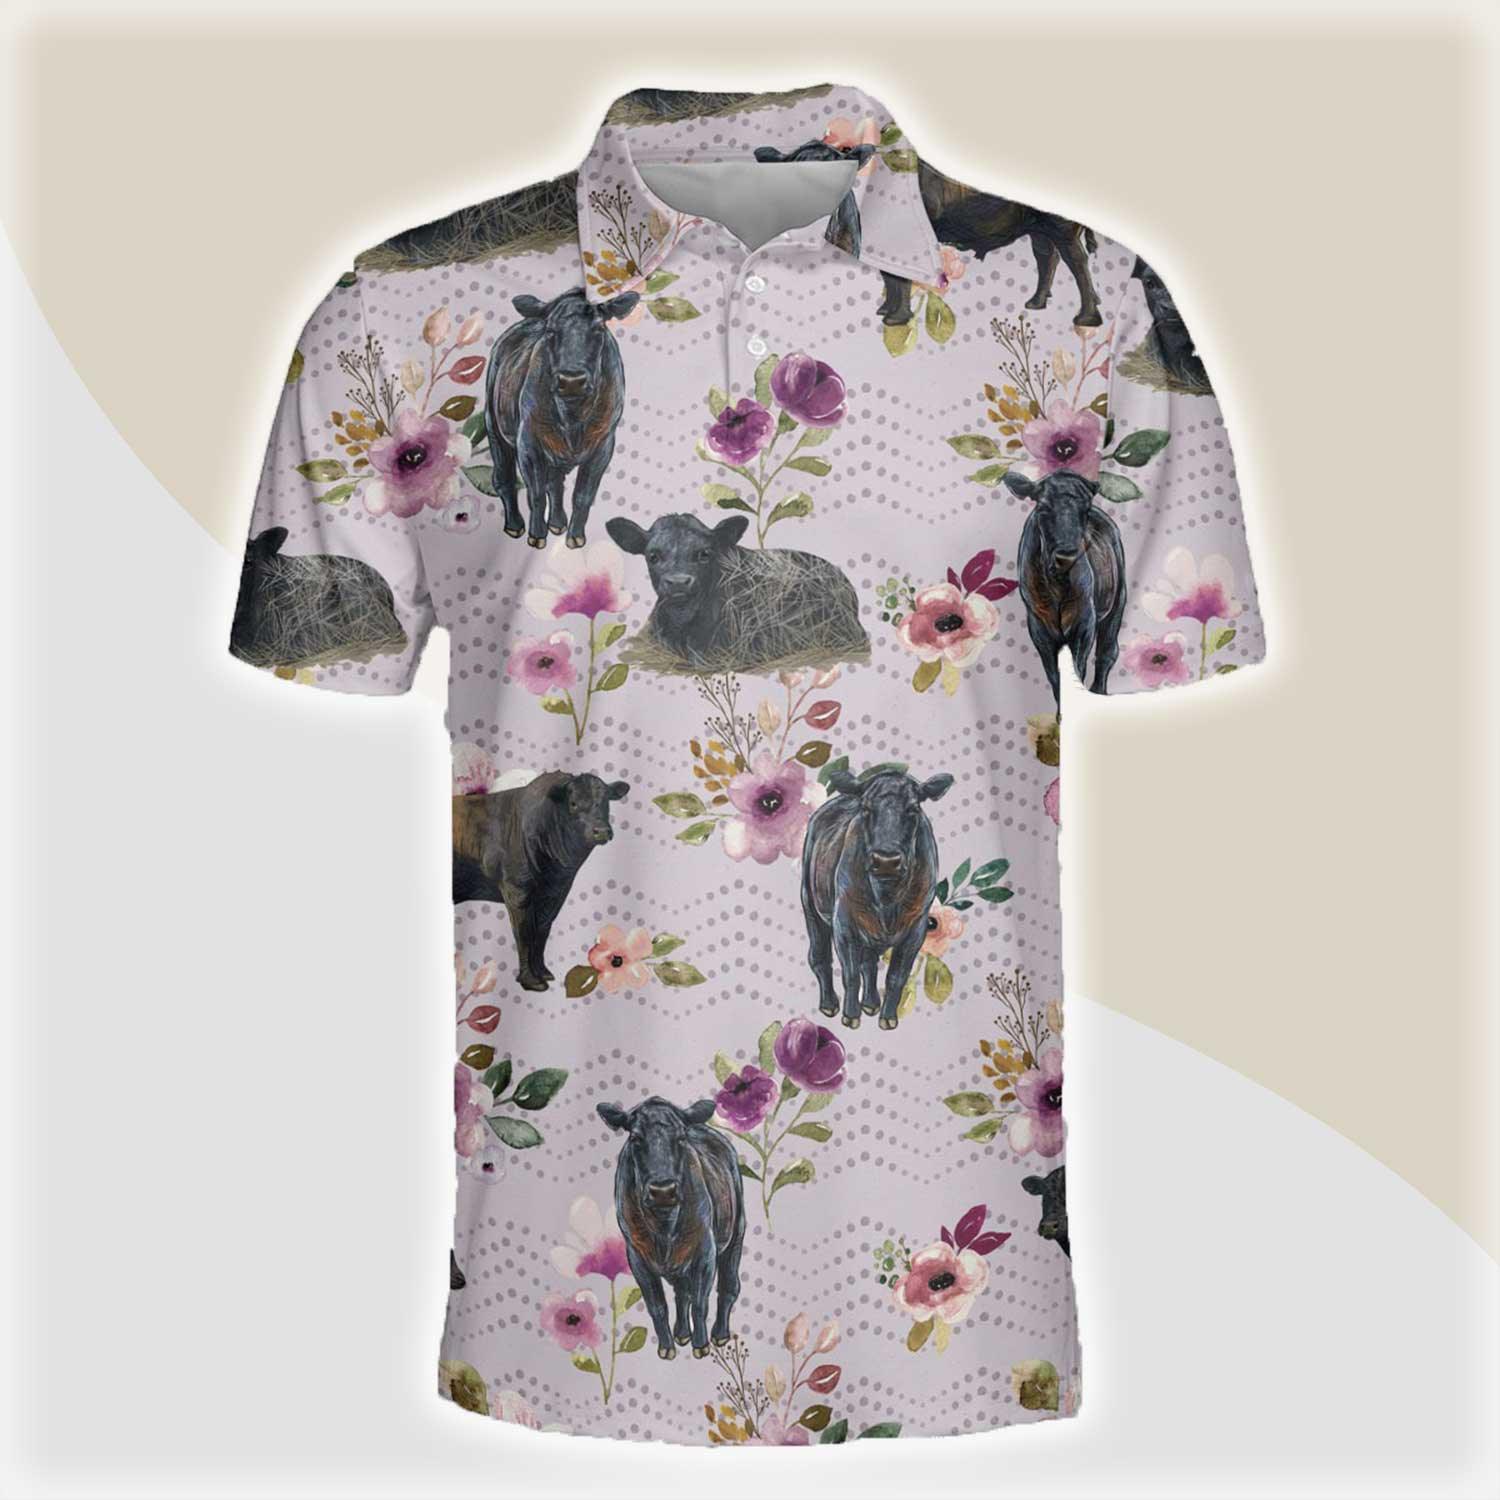 Black Angus Men Polo Shirts - Black Angus Autumn Amethyst Boho Floral Pattern Button Shirts For Men - Perfect Gift For Black Angus Lovers, Cattle Lovers - Amzanimalsgift